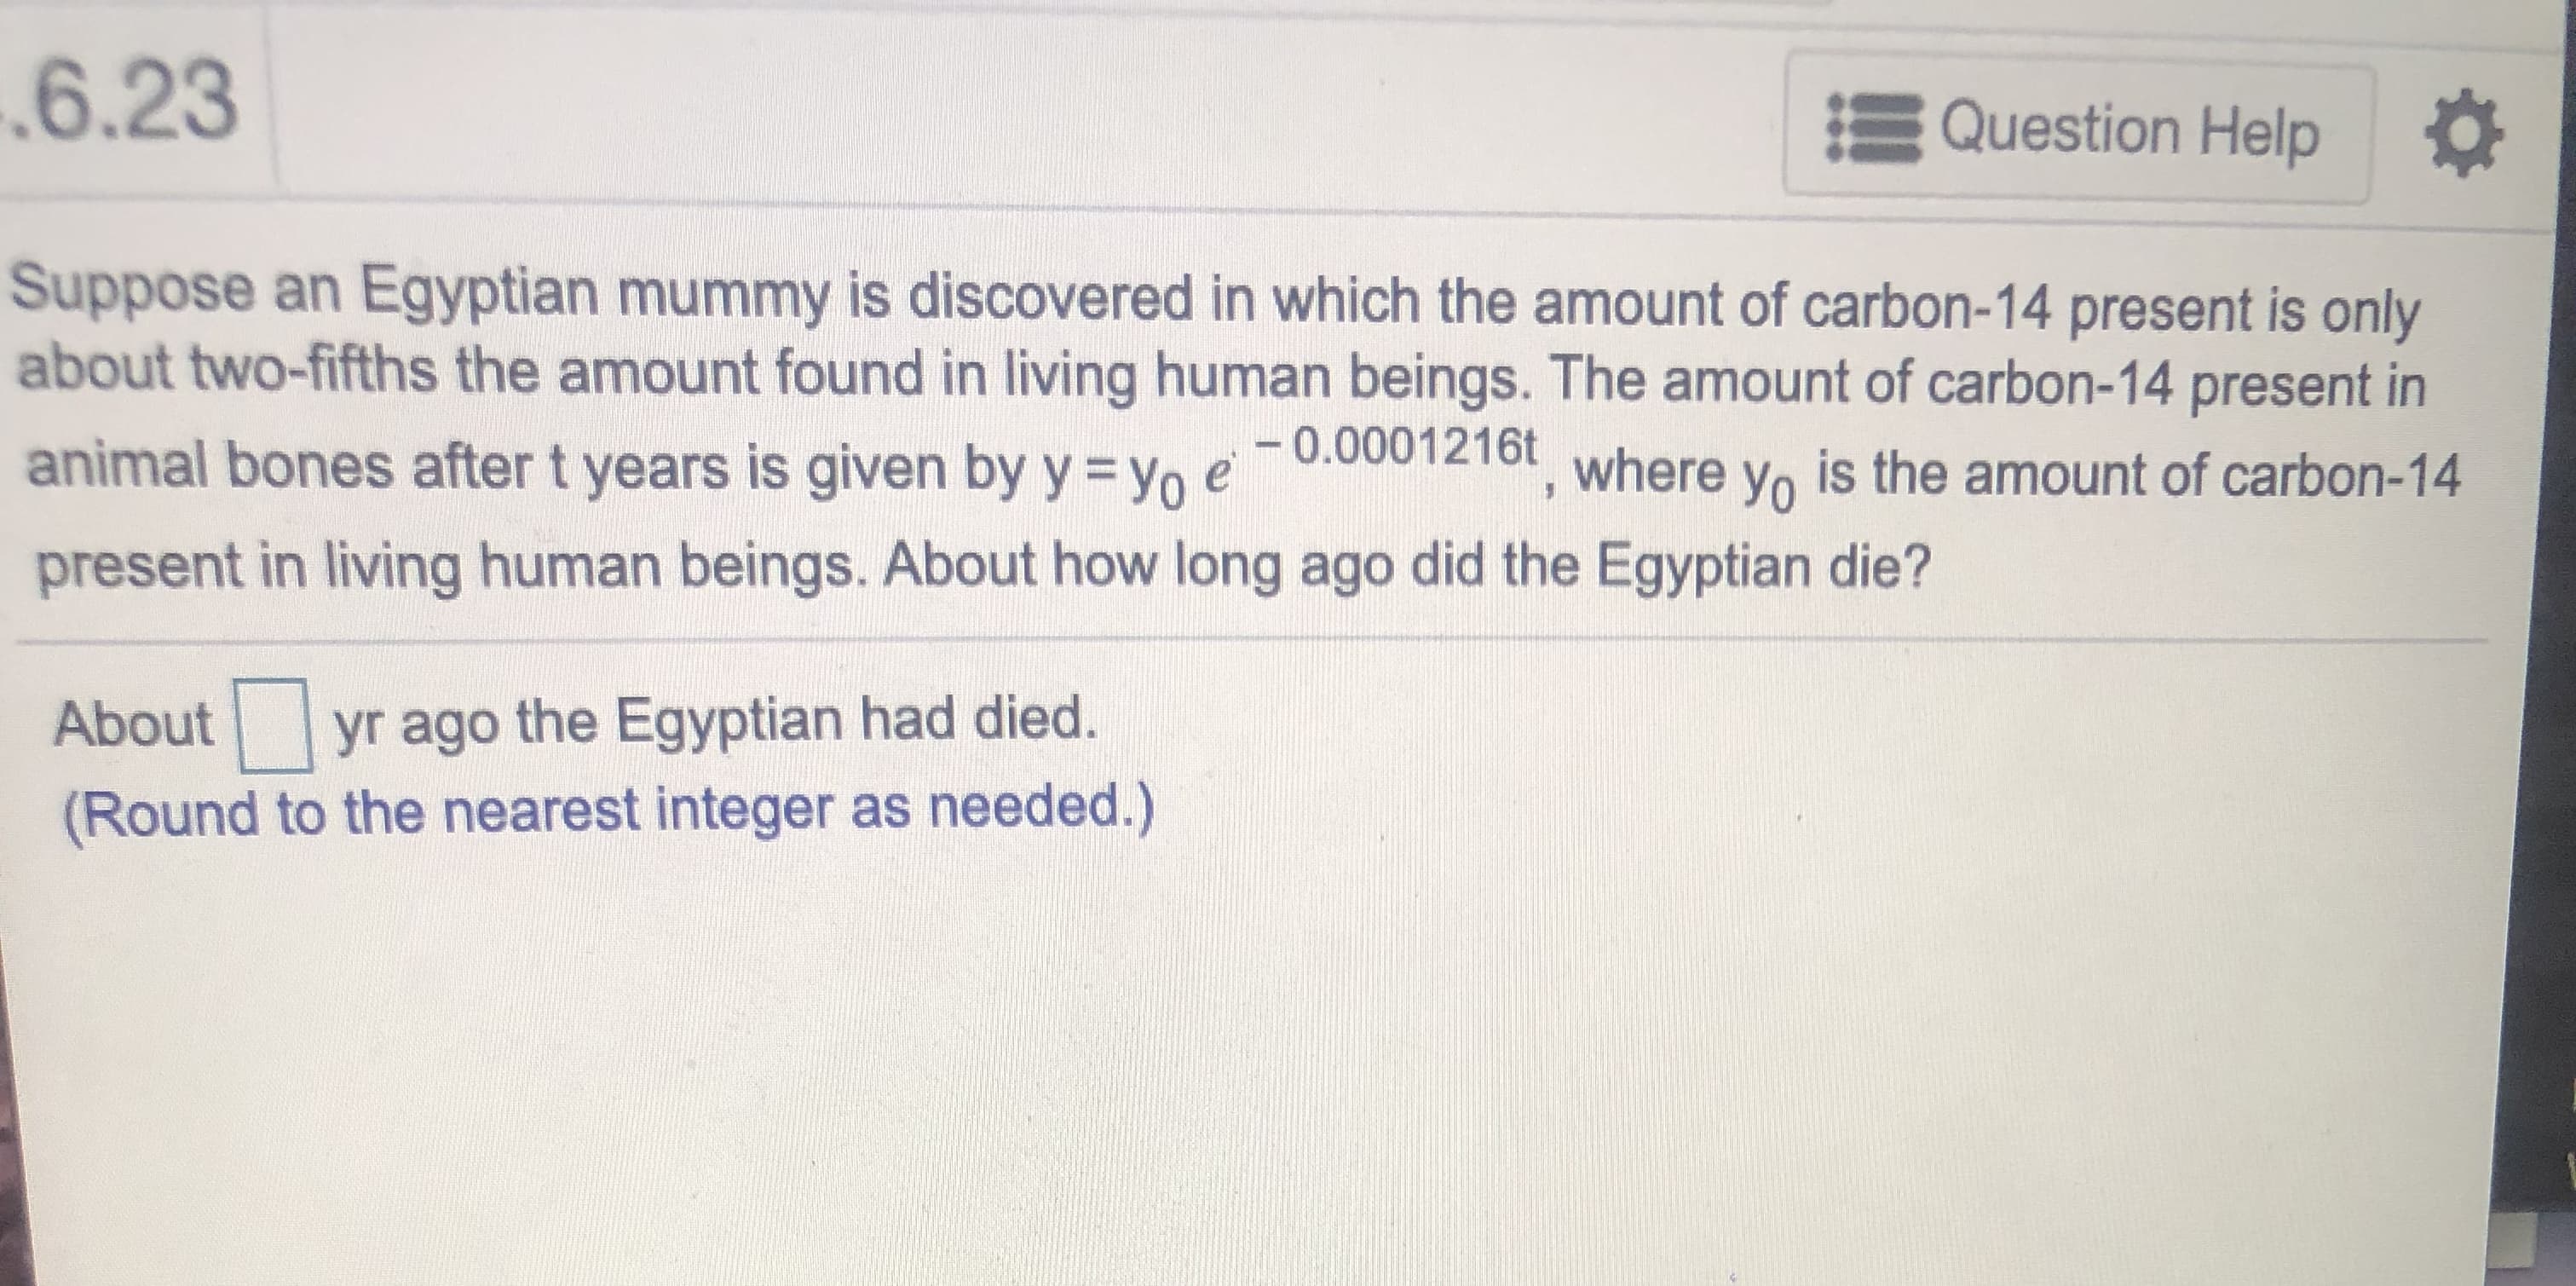 Suppose an Egyptian mummy is discovered in which the amount of carbon-14 present is only
about two-fifths the amount found in living human beings. The amount of carbon-14 present in
animal bones after t years is given by y = yo e0.0001216t where yo is the amount of carbon-14
present in living human beings. About how long ago did the Egyptian die?
About
yr ago the Egyptian had died.
